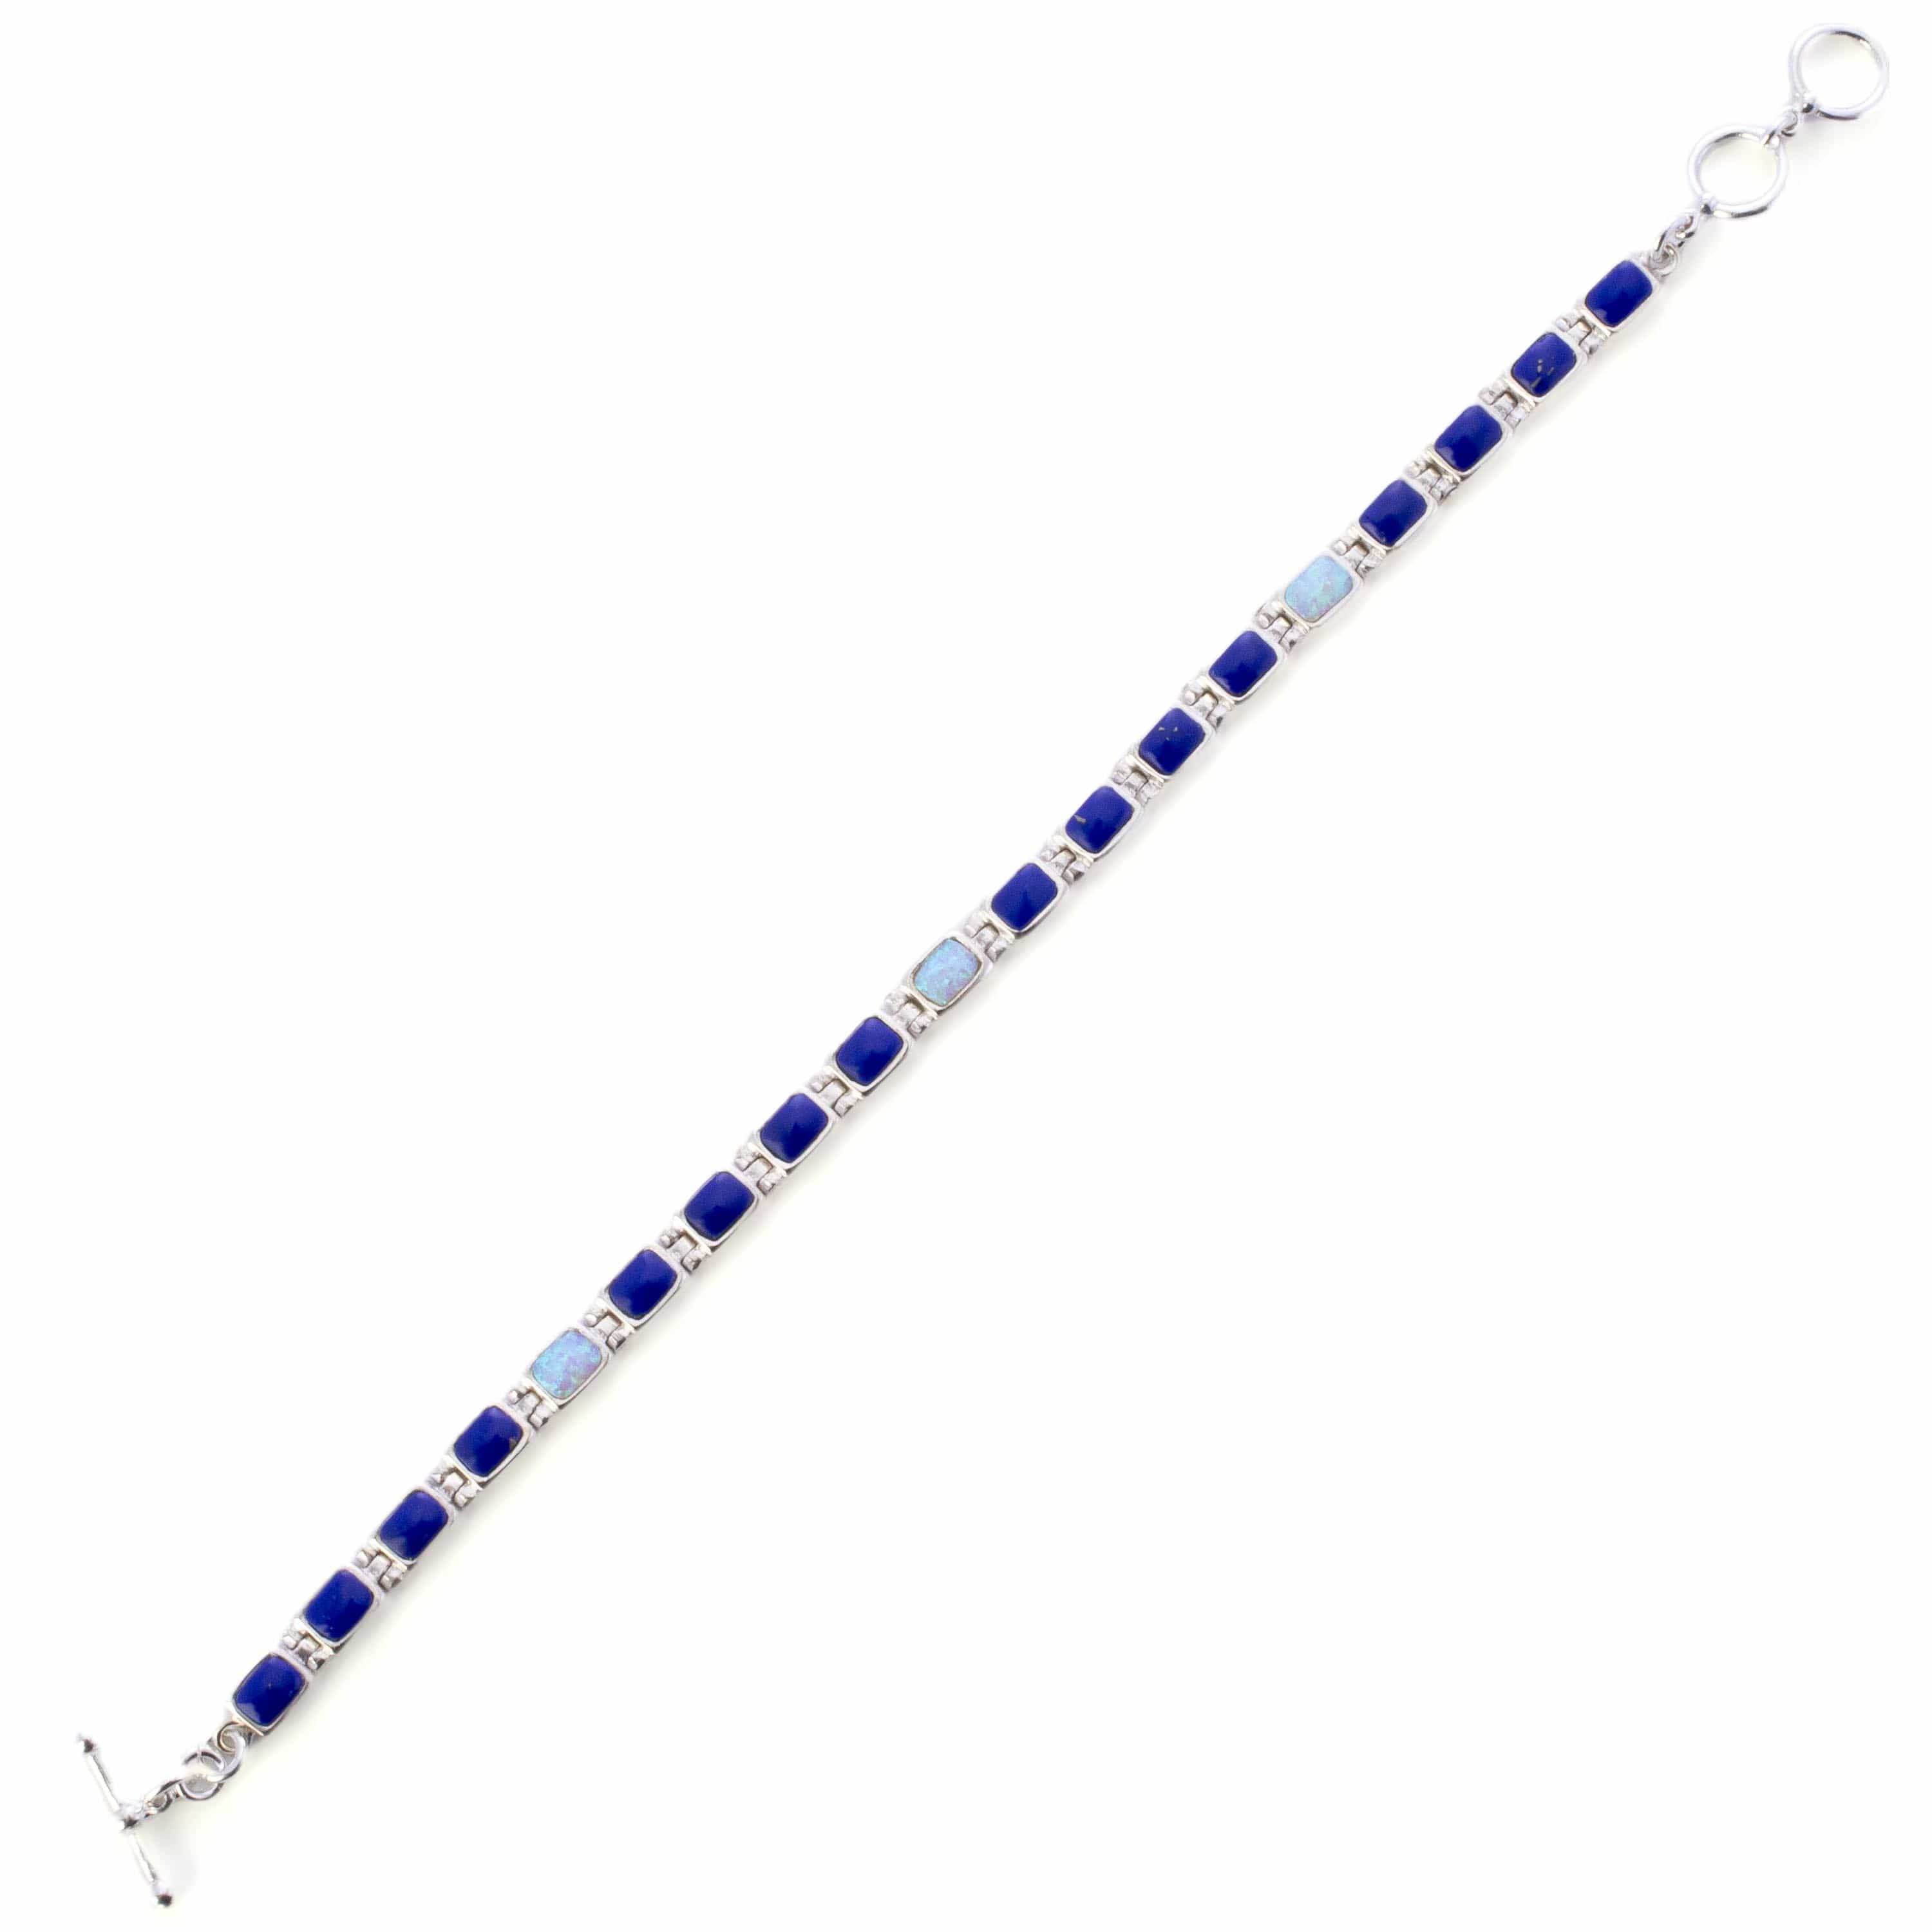 Kalifano Southwest Silver Jewelry Lapis 925 Sterling Silver Bracelet USA Handmade with Opal Accent NMB.0207.LP